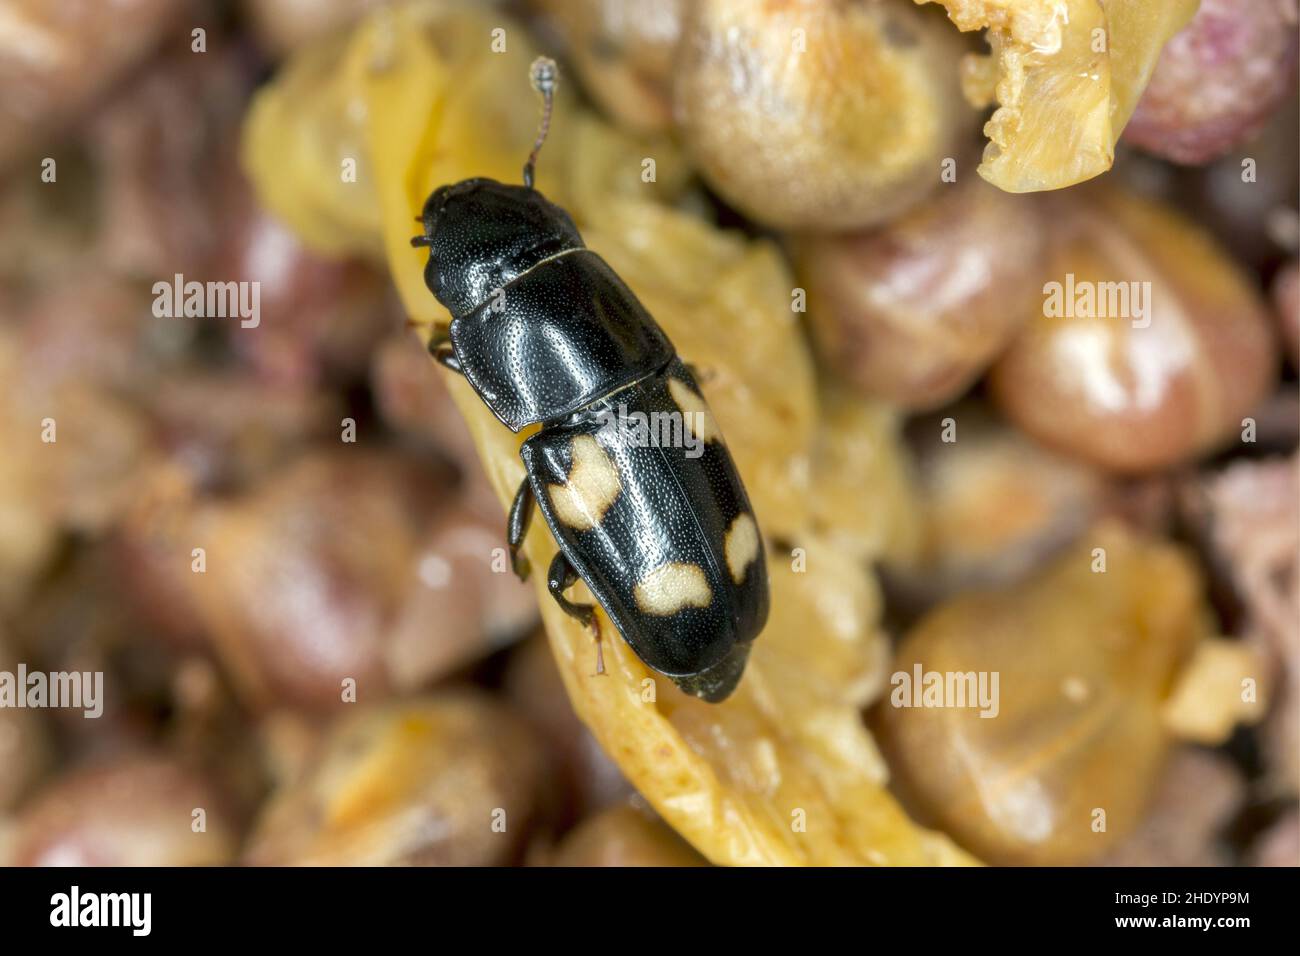 Glischrochilus quadrisignatus (four-spotted sap beetle, beer bug or picnic beetle) (Nitidulidae) on rotten fruits. Stock Photo